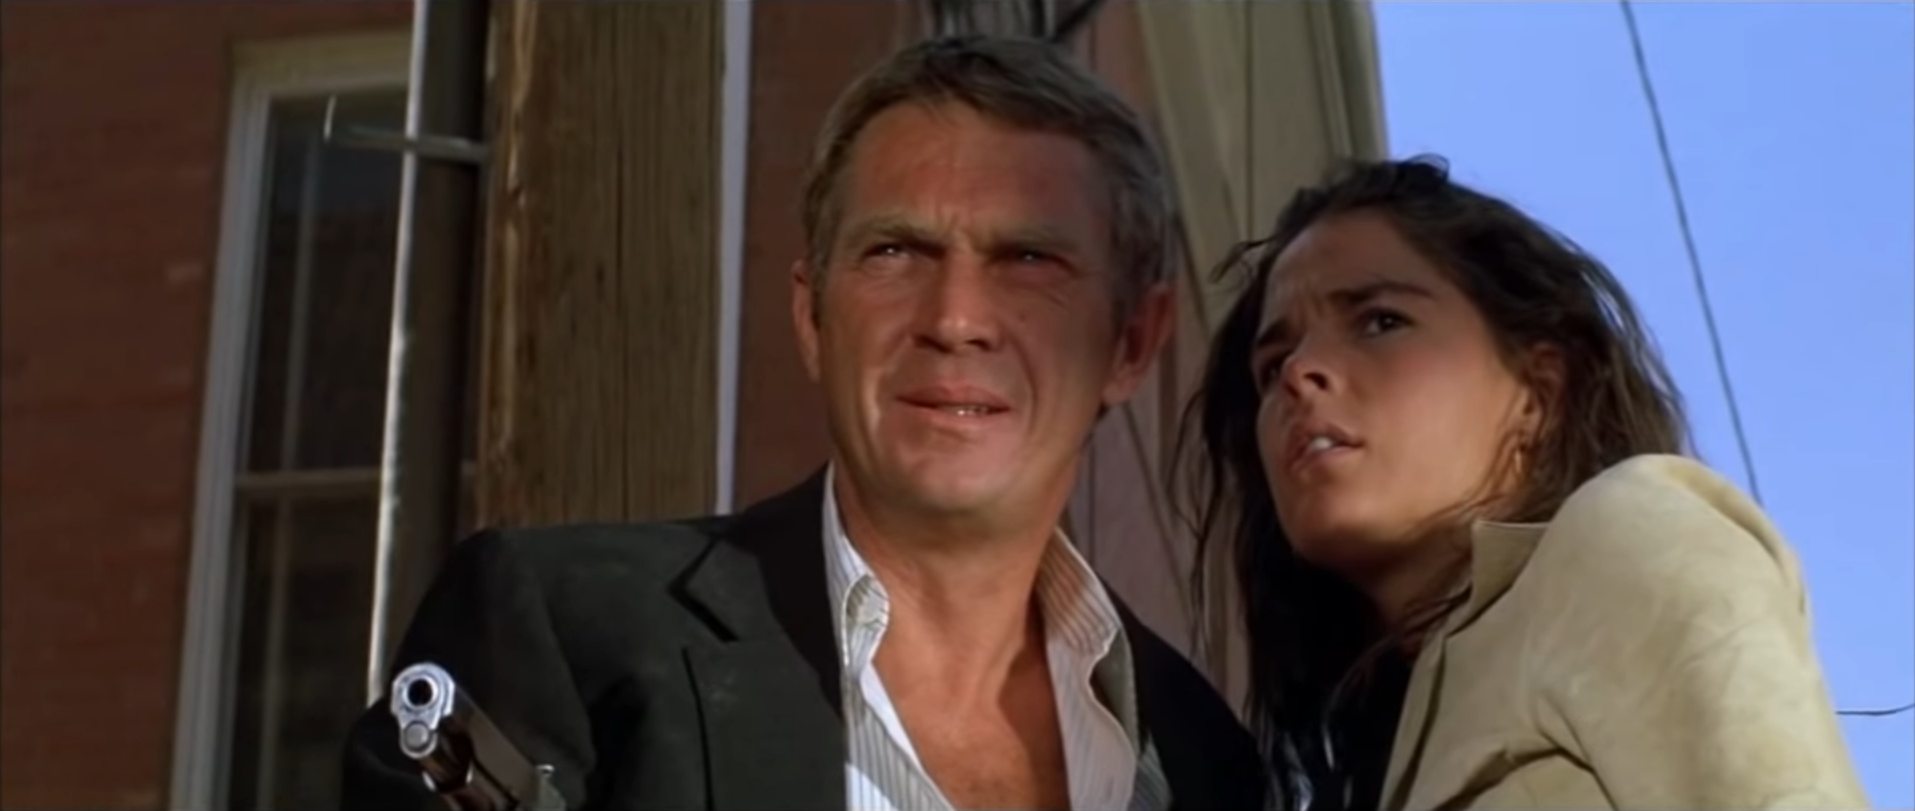 Close-up of Steve McQueen and Ali MacGraw as gangster couple in alerter pose; he holds a gun at the ready.